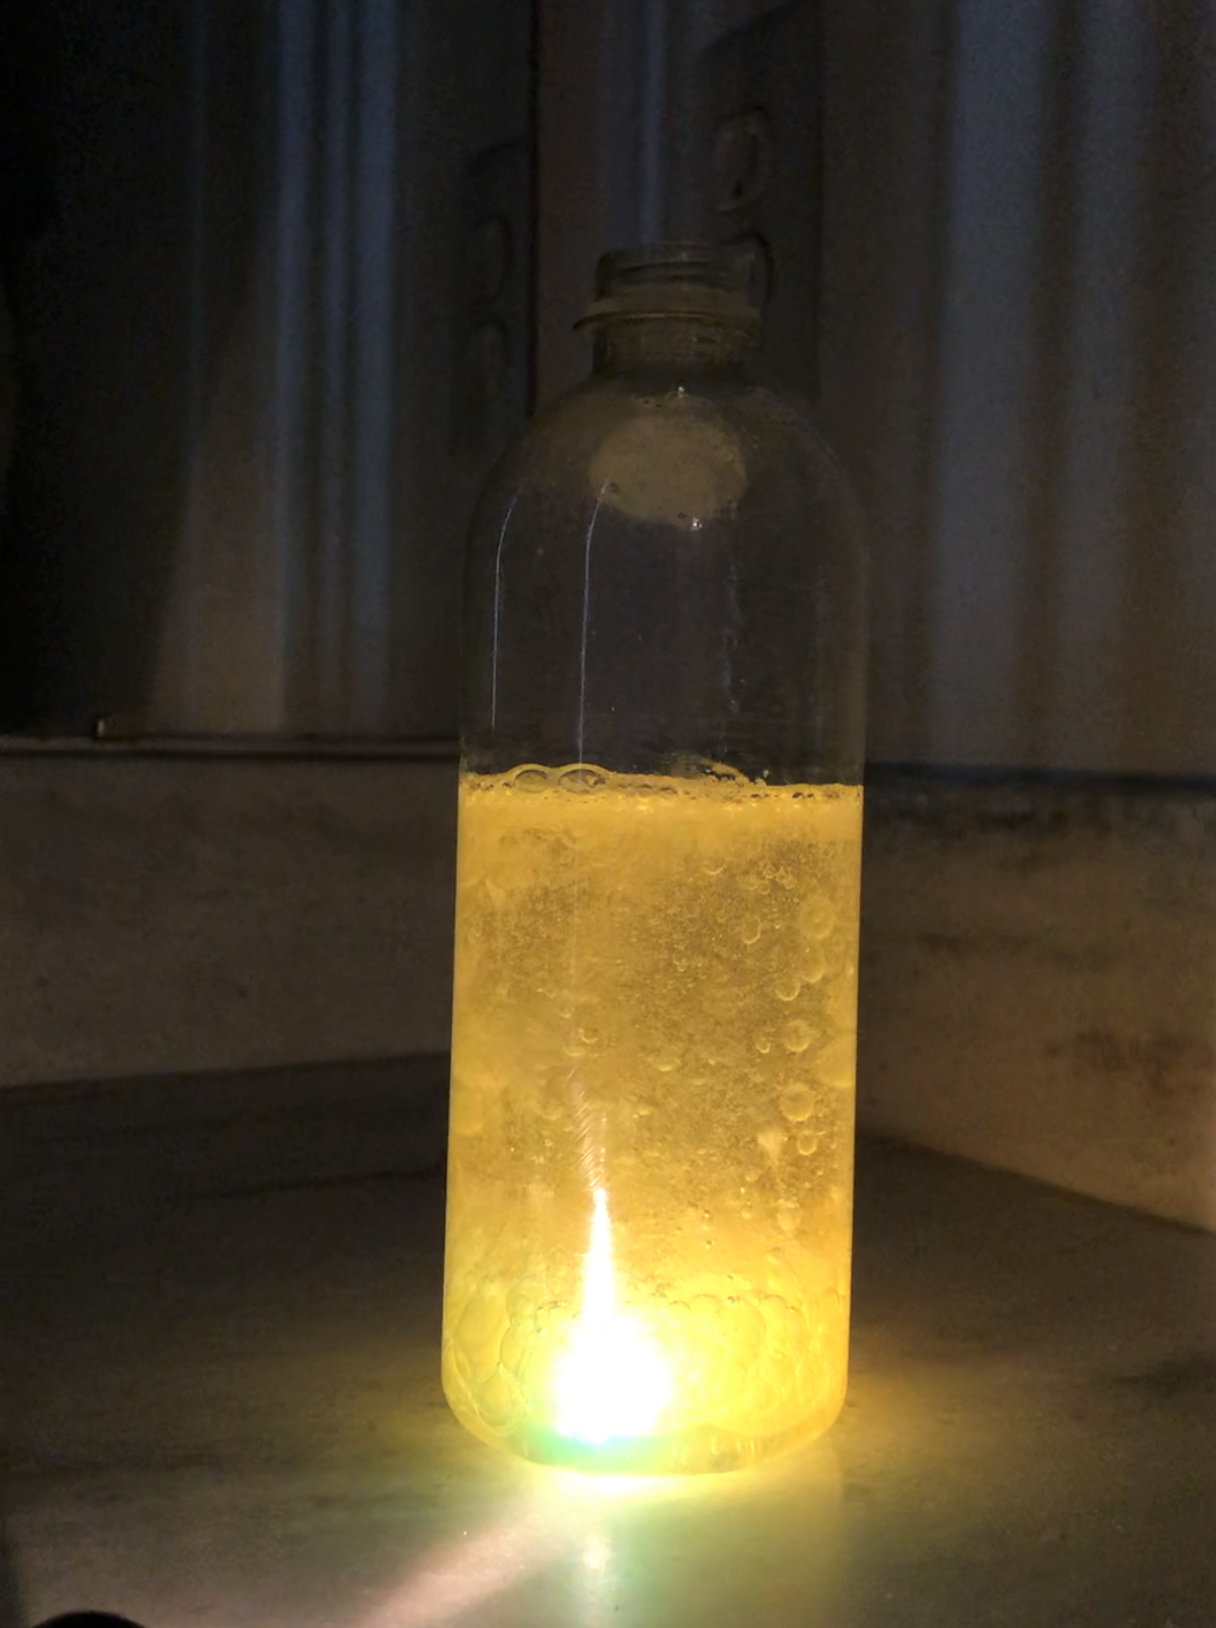 Make your own glow in the dark bubble lamp.